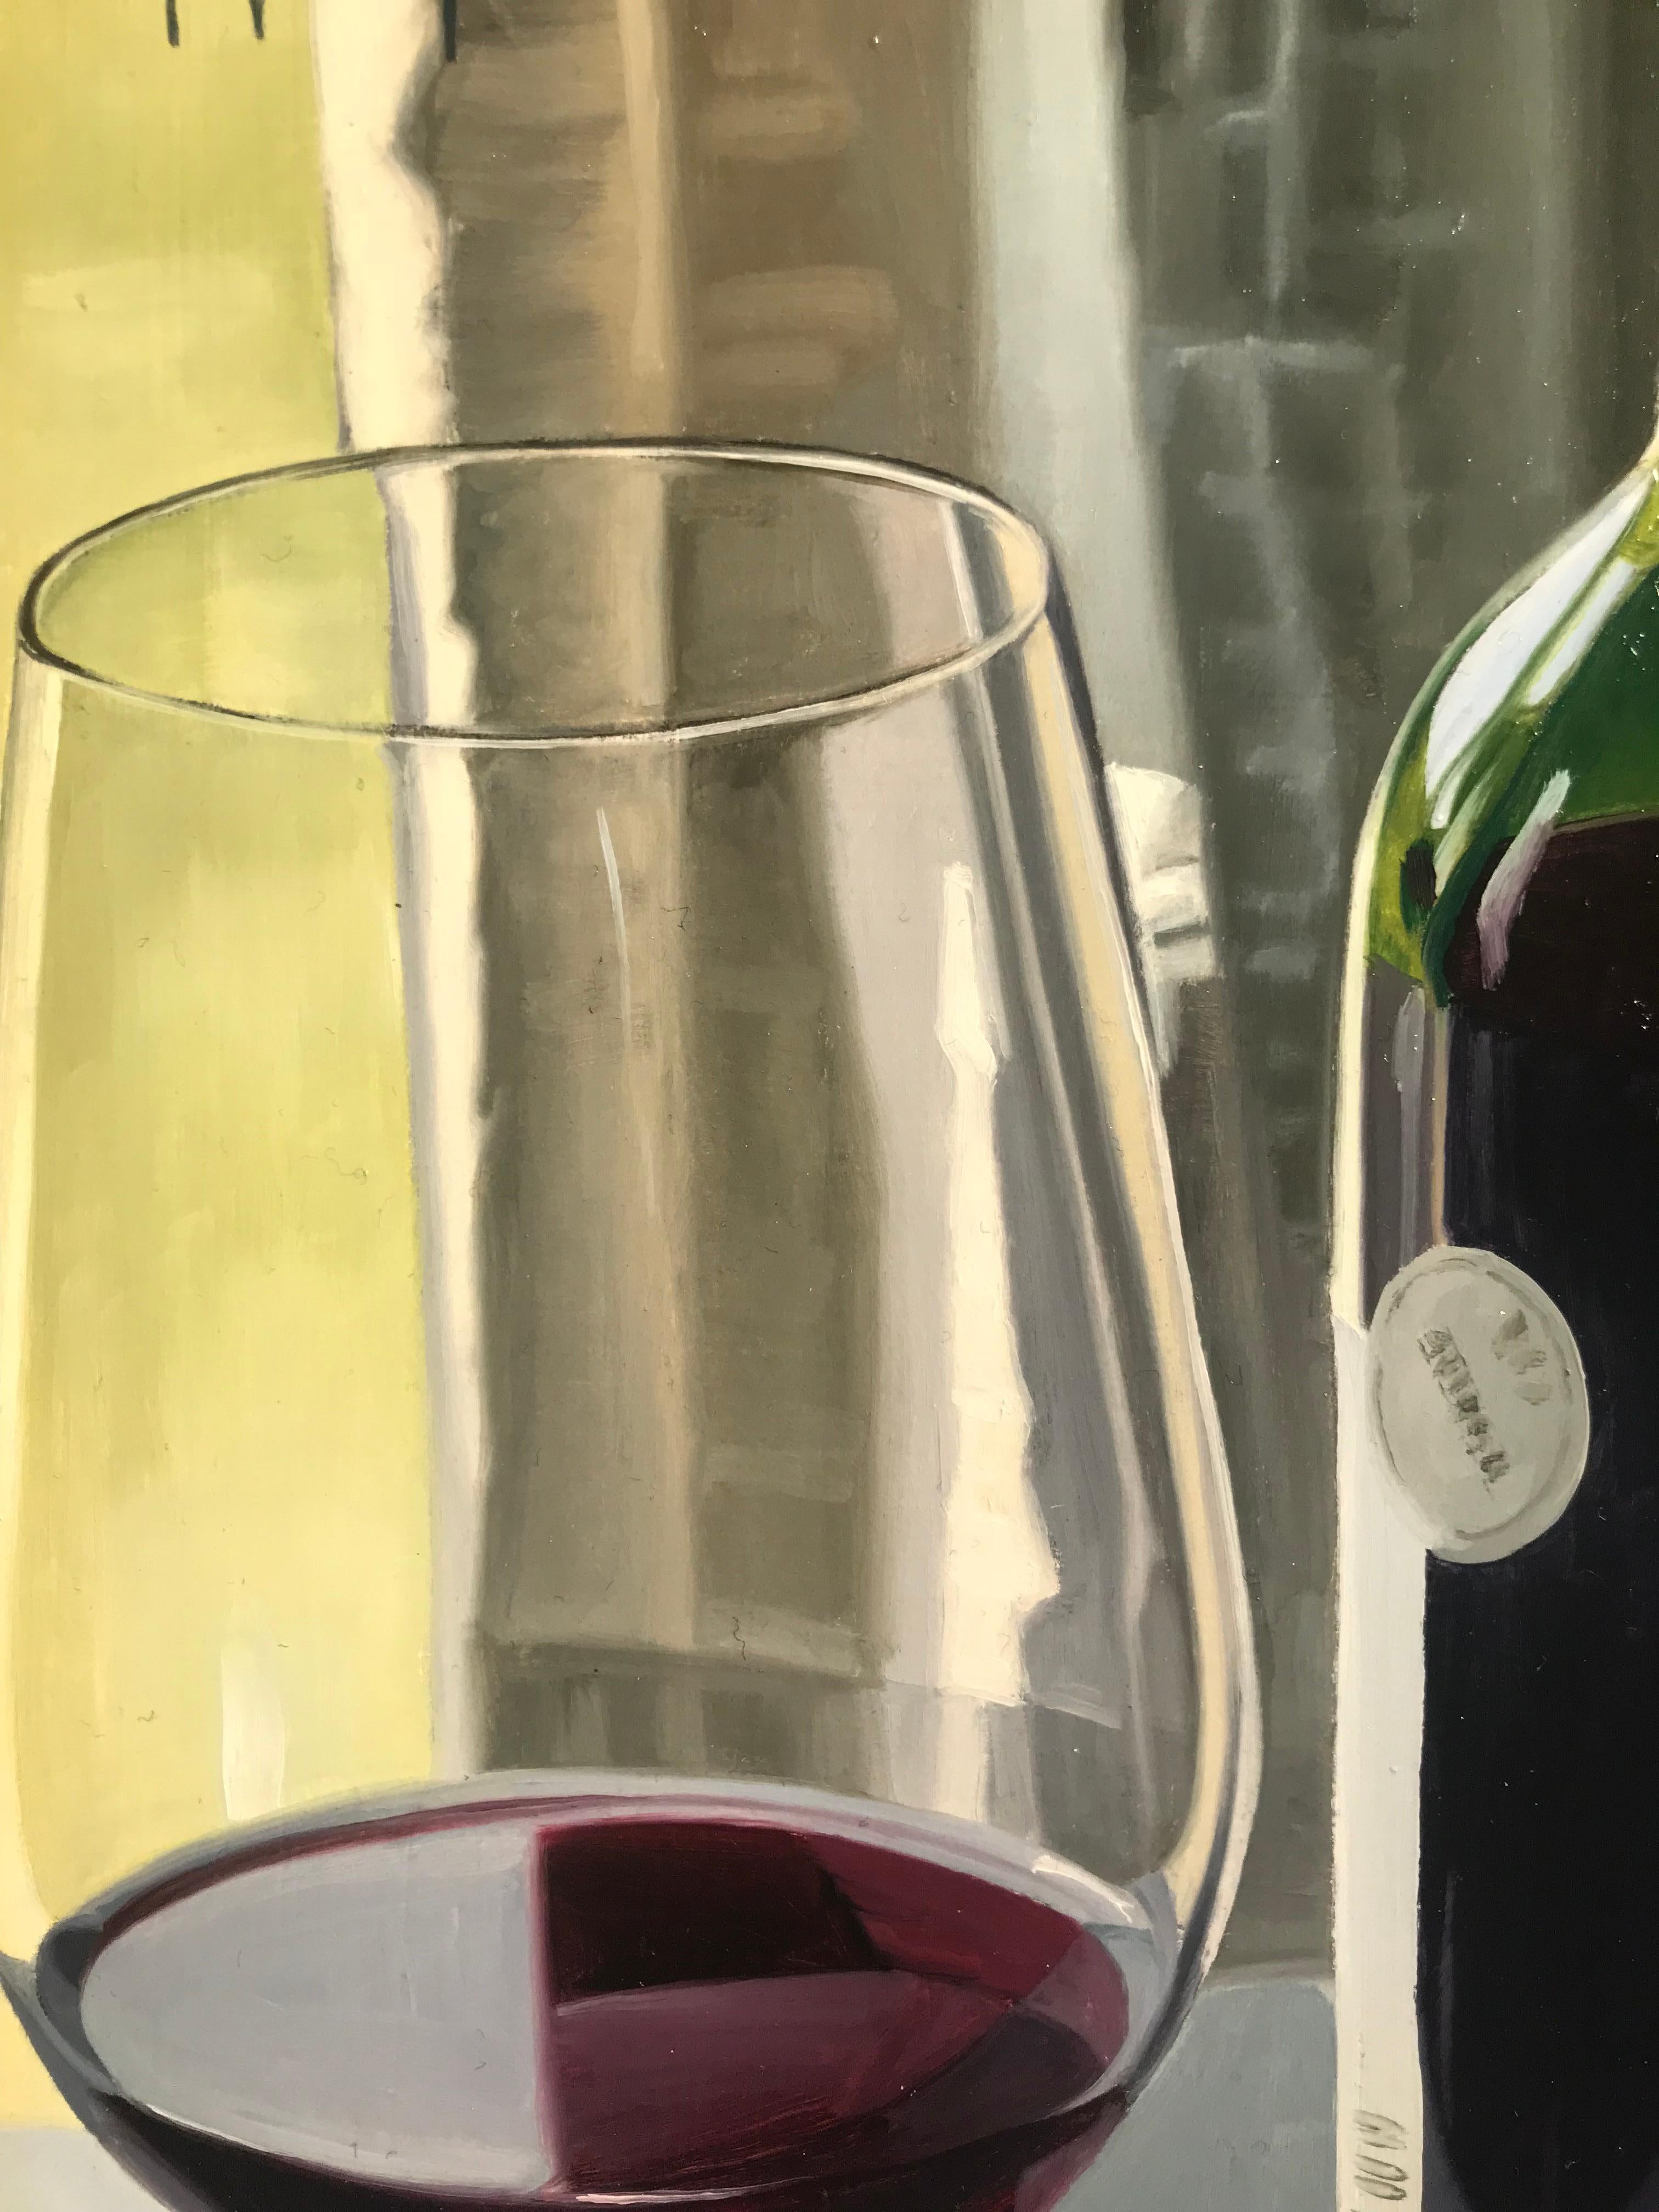 'Fine Wine' by Miguel Angel Nunez is an incredible example of the artist being able to capture the stunning details and light with the up most precision 

Through Miguel’s precise brushstrokes and fine layers of paint a sense of precision and